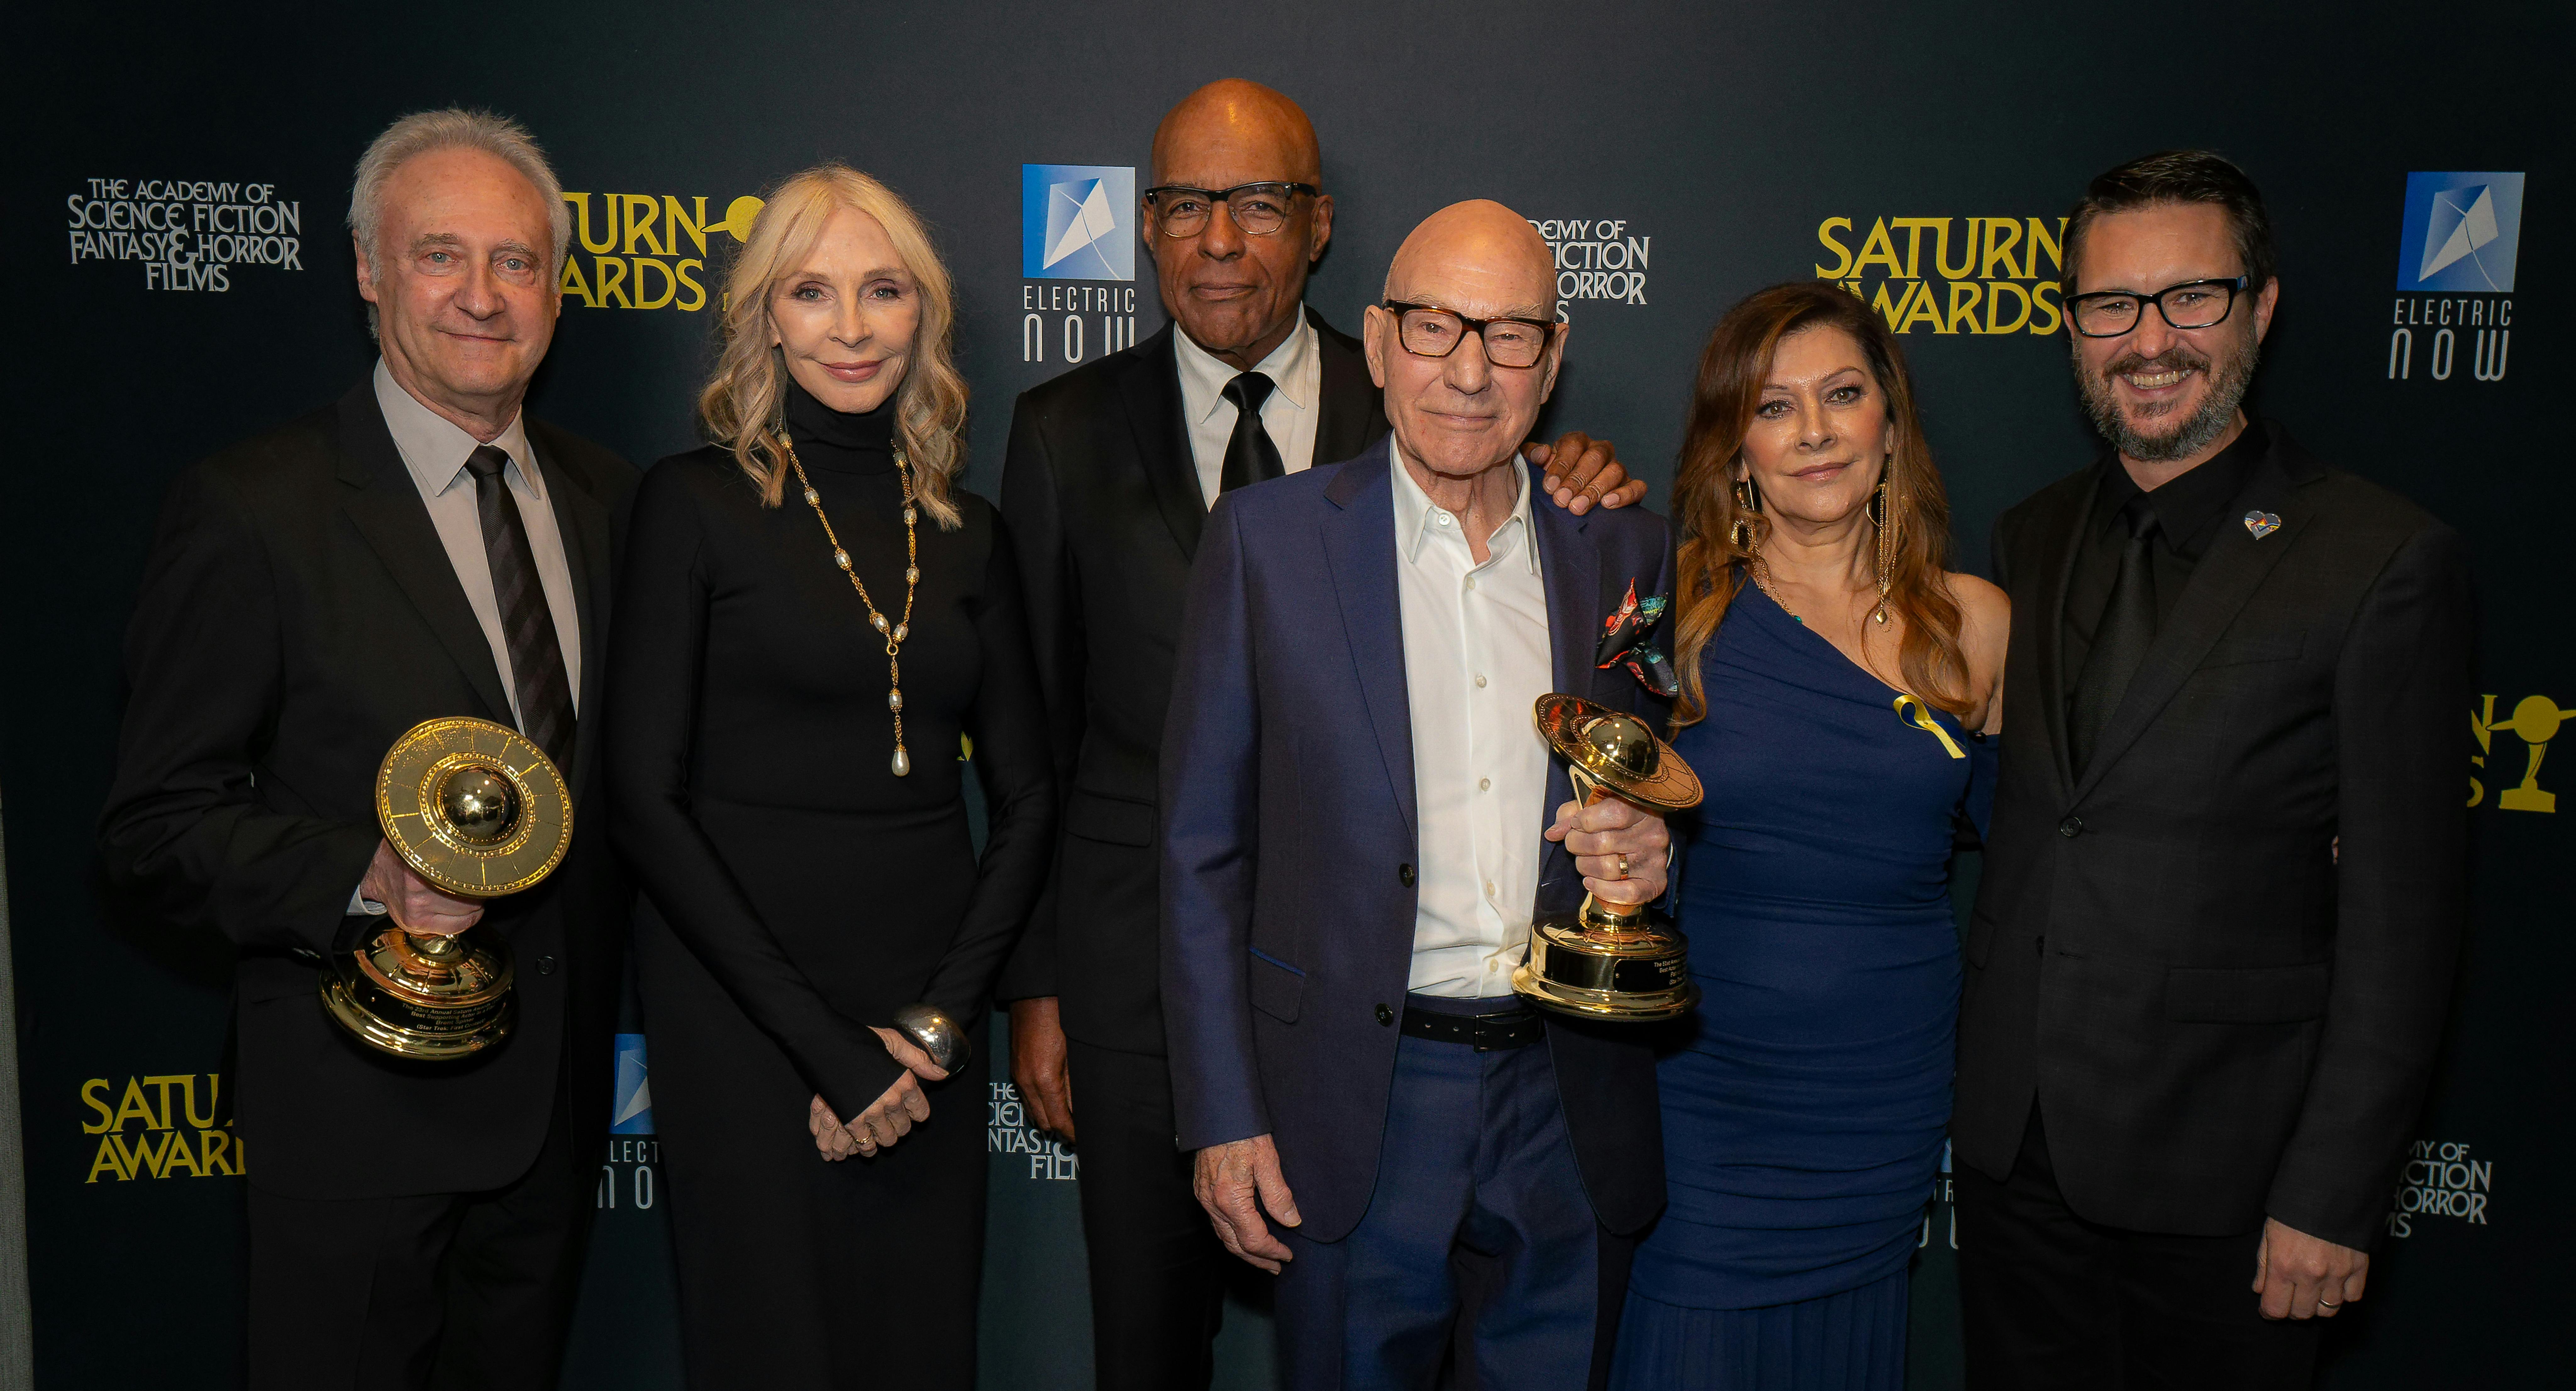 Brent Spiner, Gates McFadden, Michael Dorn, Patrick Stewart, Marina Sirtis, and Wil Wheaton backstage at the Saturn Awards with their awards